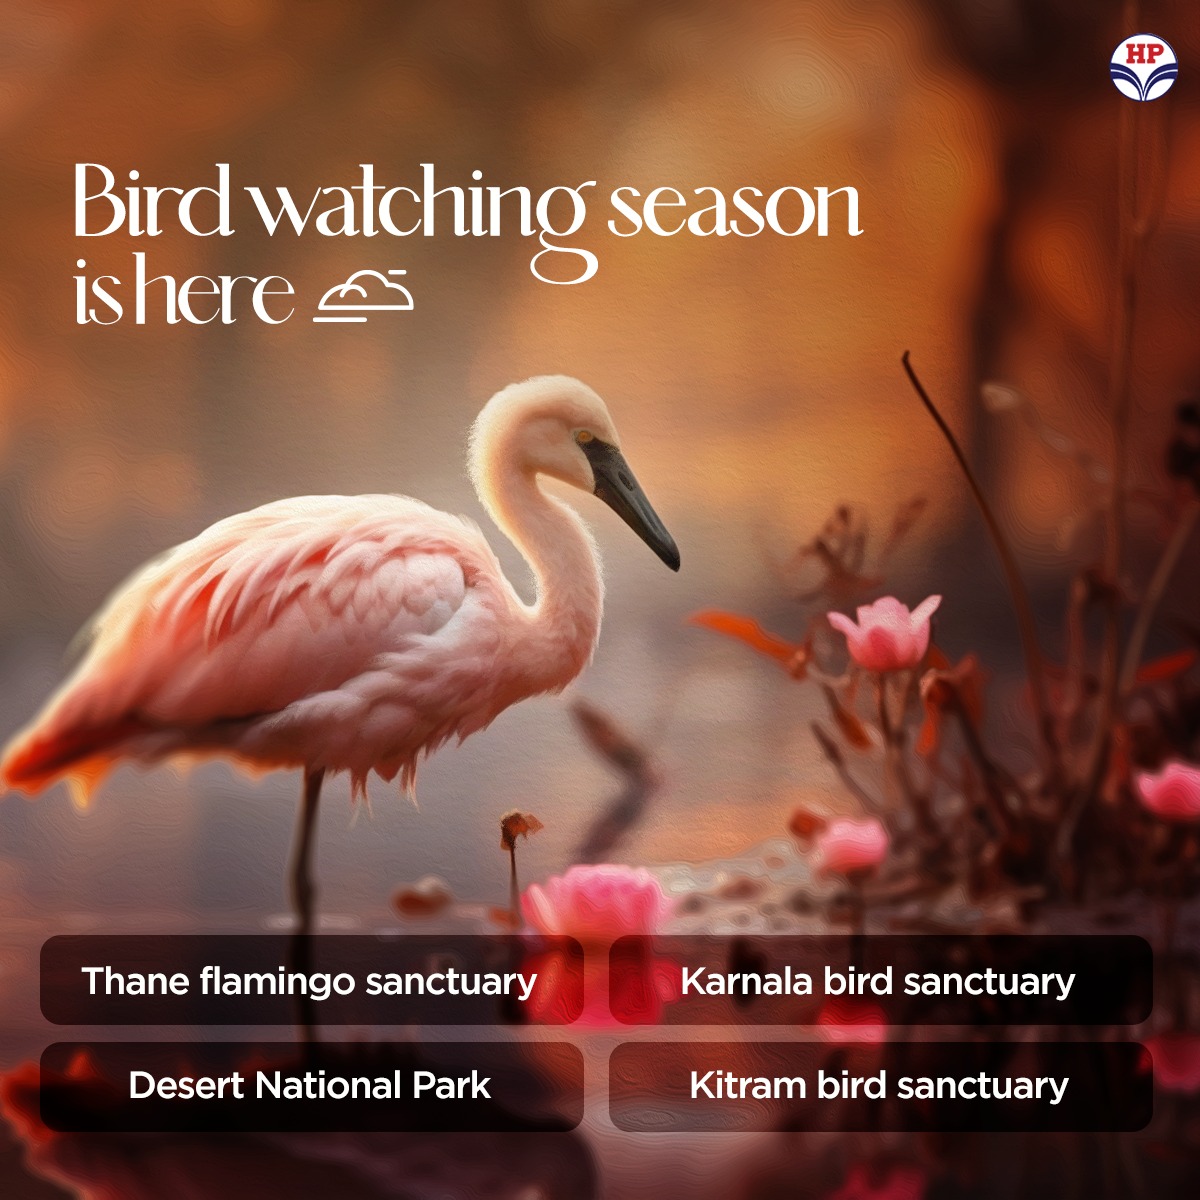 April is the perfect time for bird-spotting adventures! Leave the monotony behind and explore the best bird sanctuaries in India. Embrace the call of the wild this holiday. #HPRetail #MeraHPPump #BirdWatching #Sanctuary